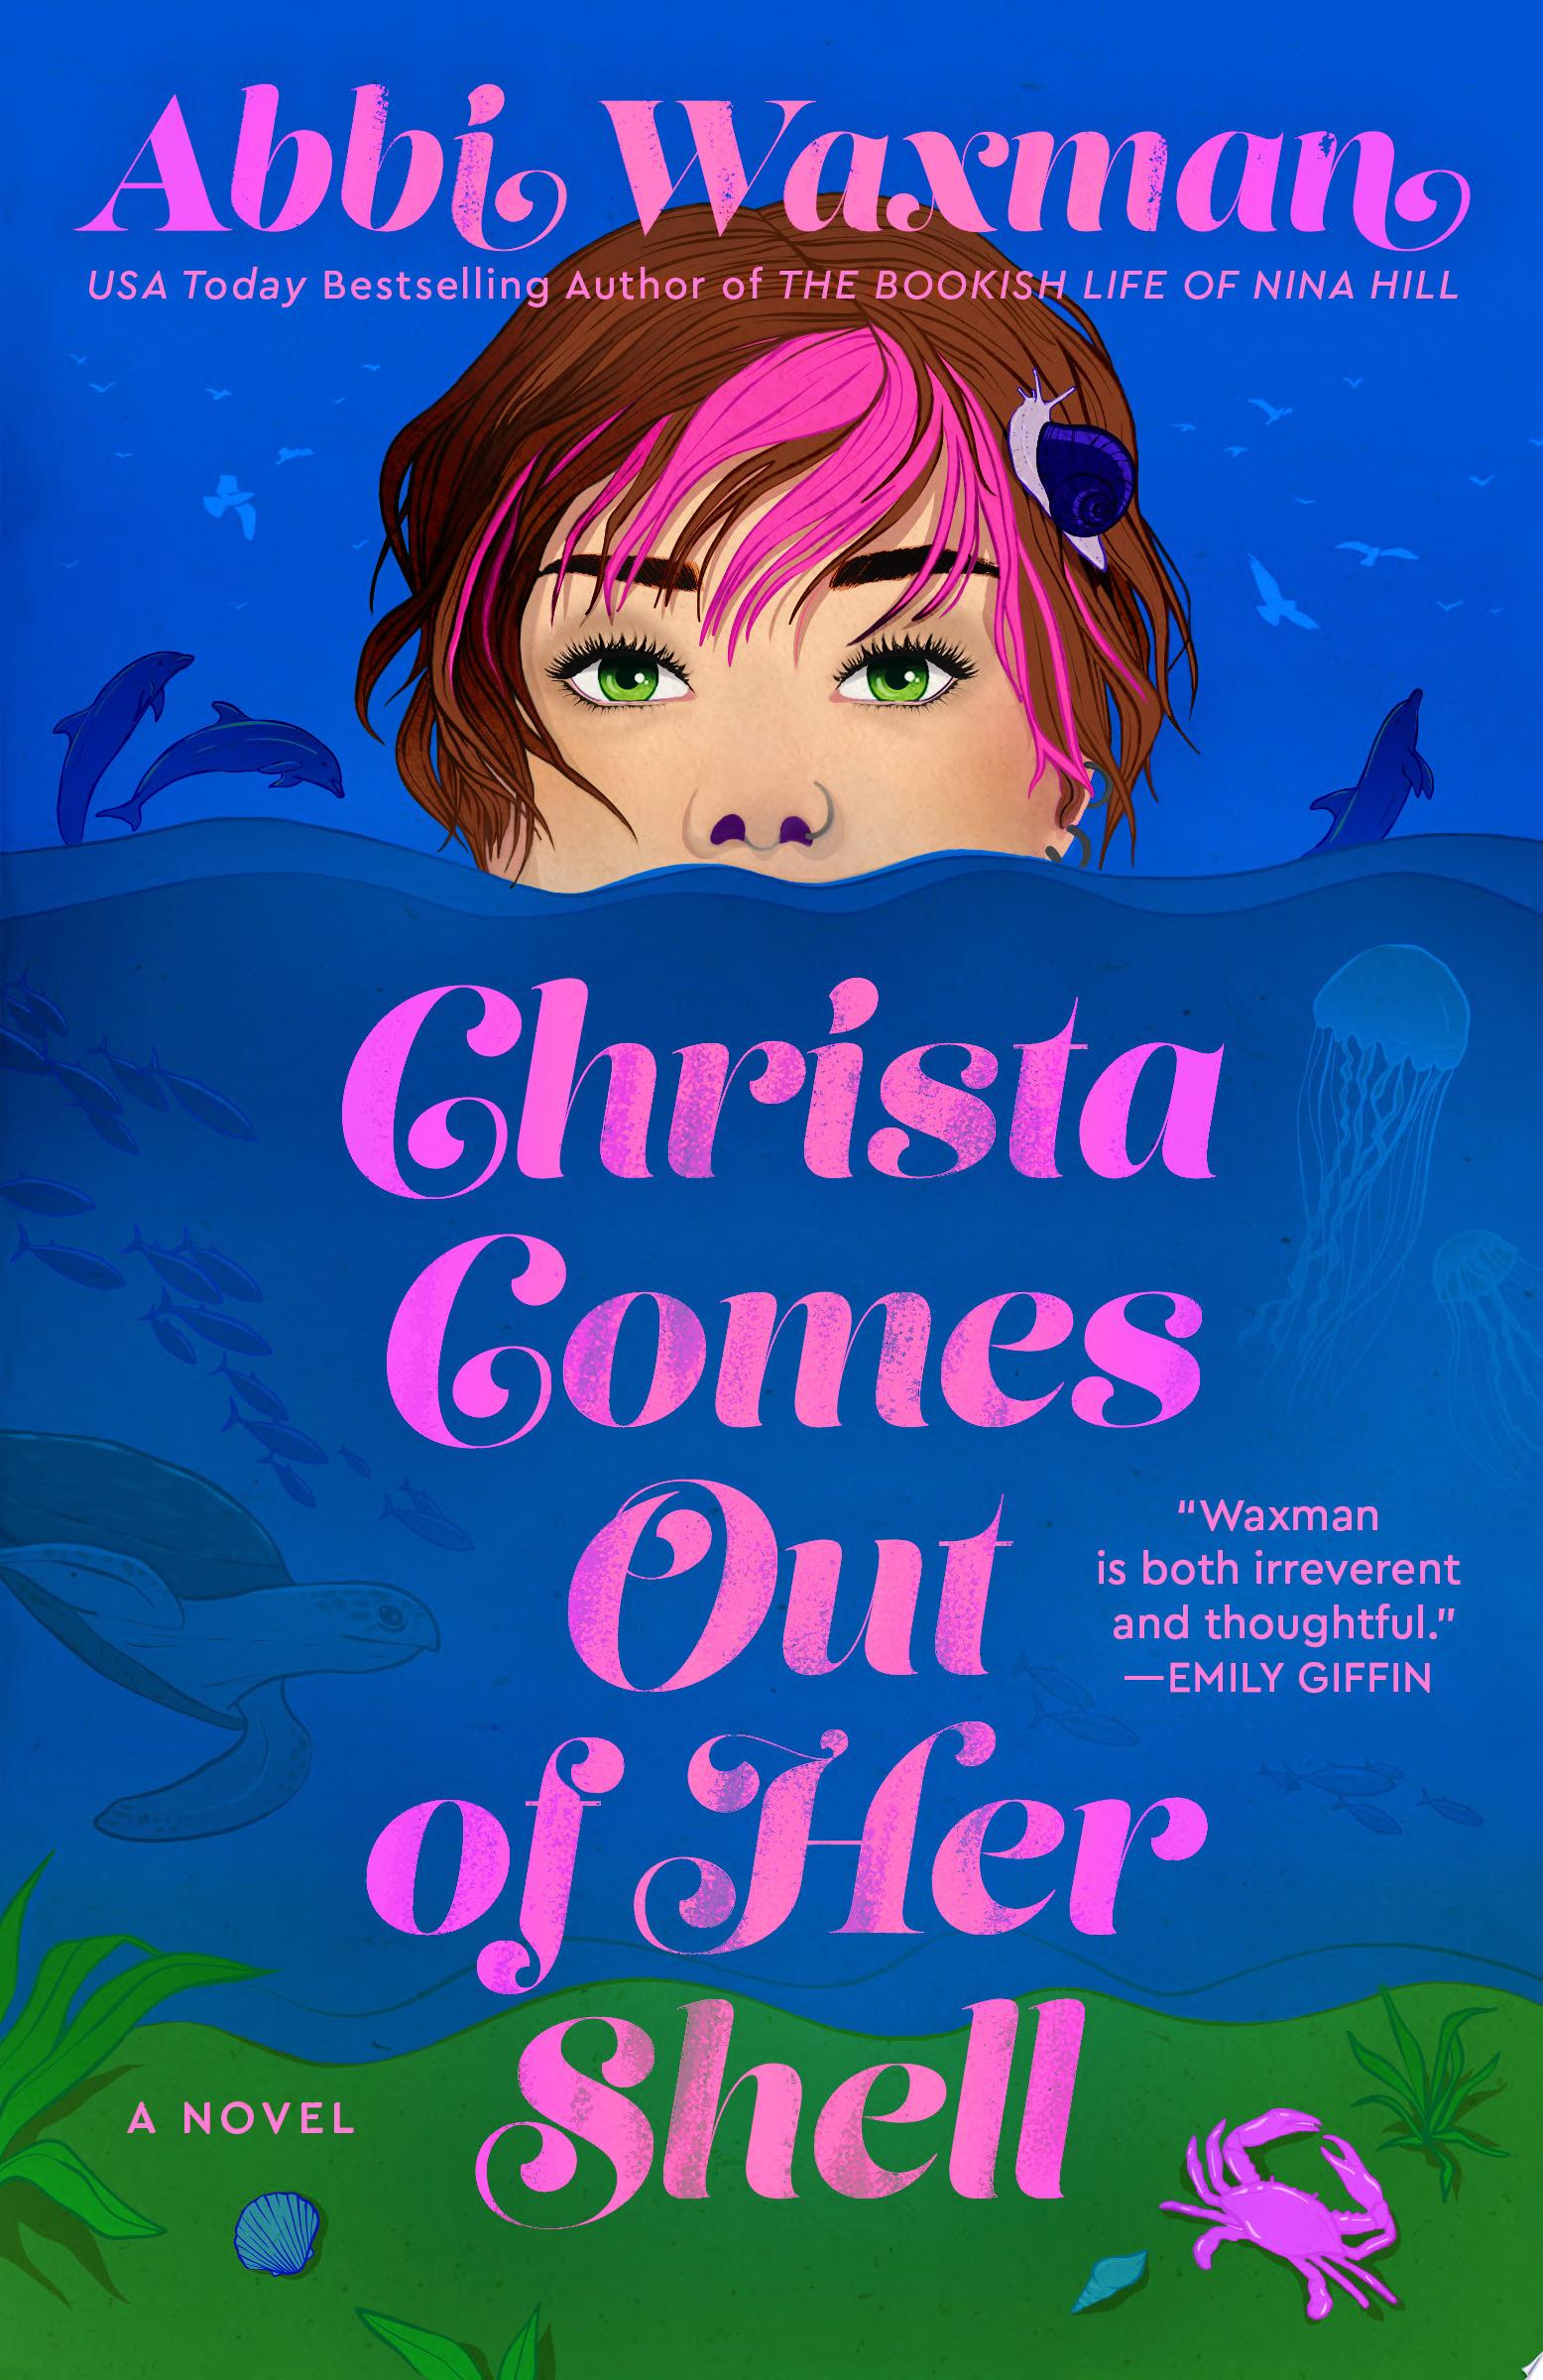 Image for "Christa Comes Out of Her Shell"